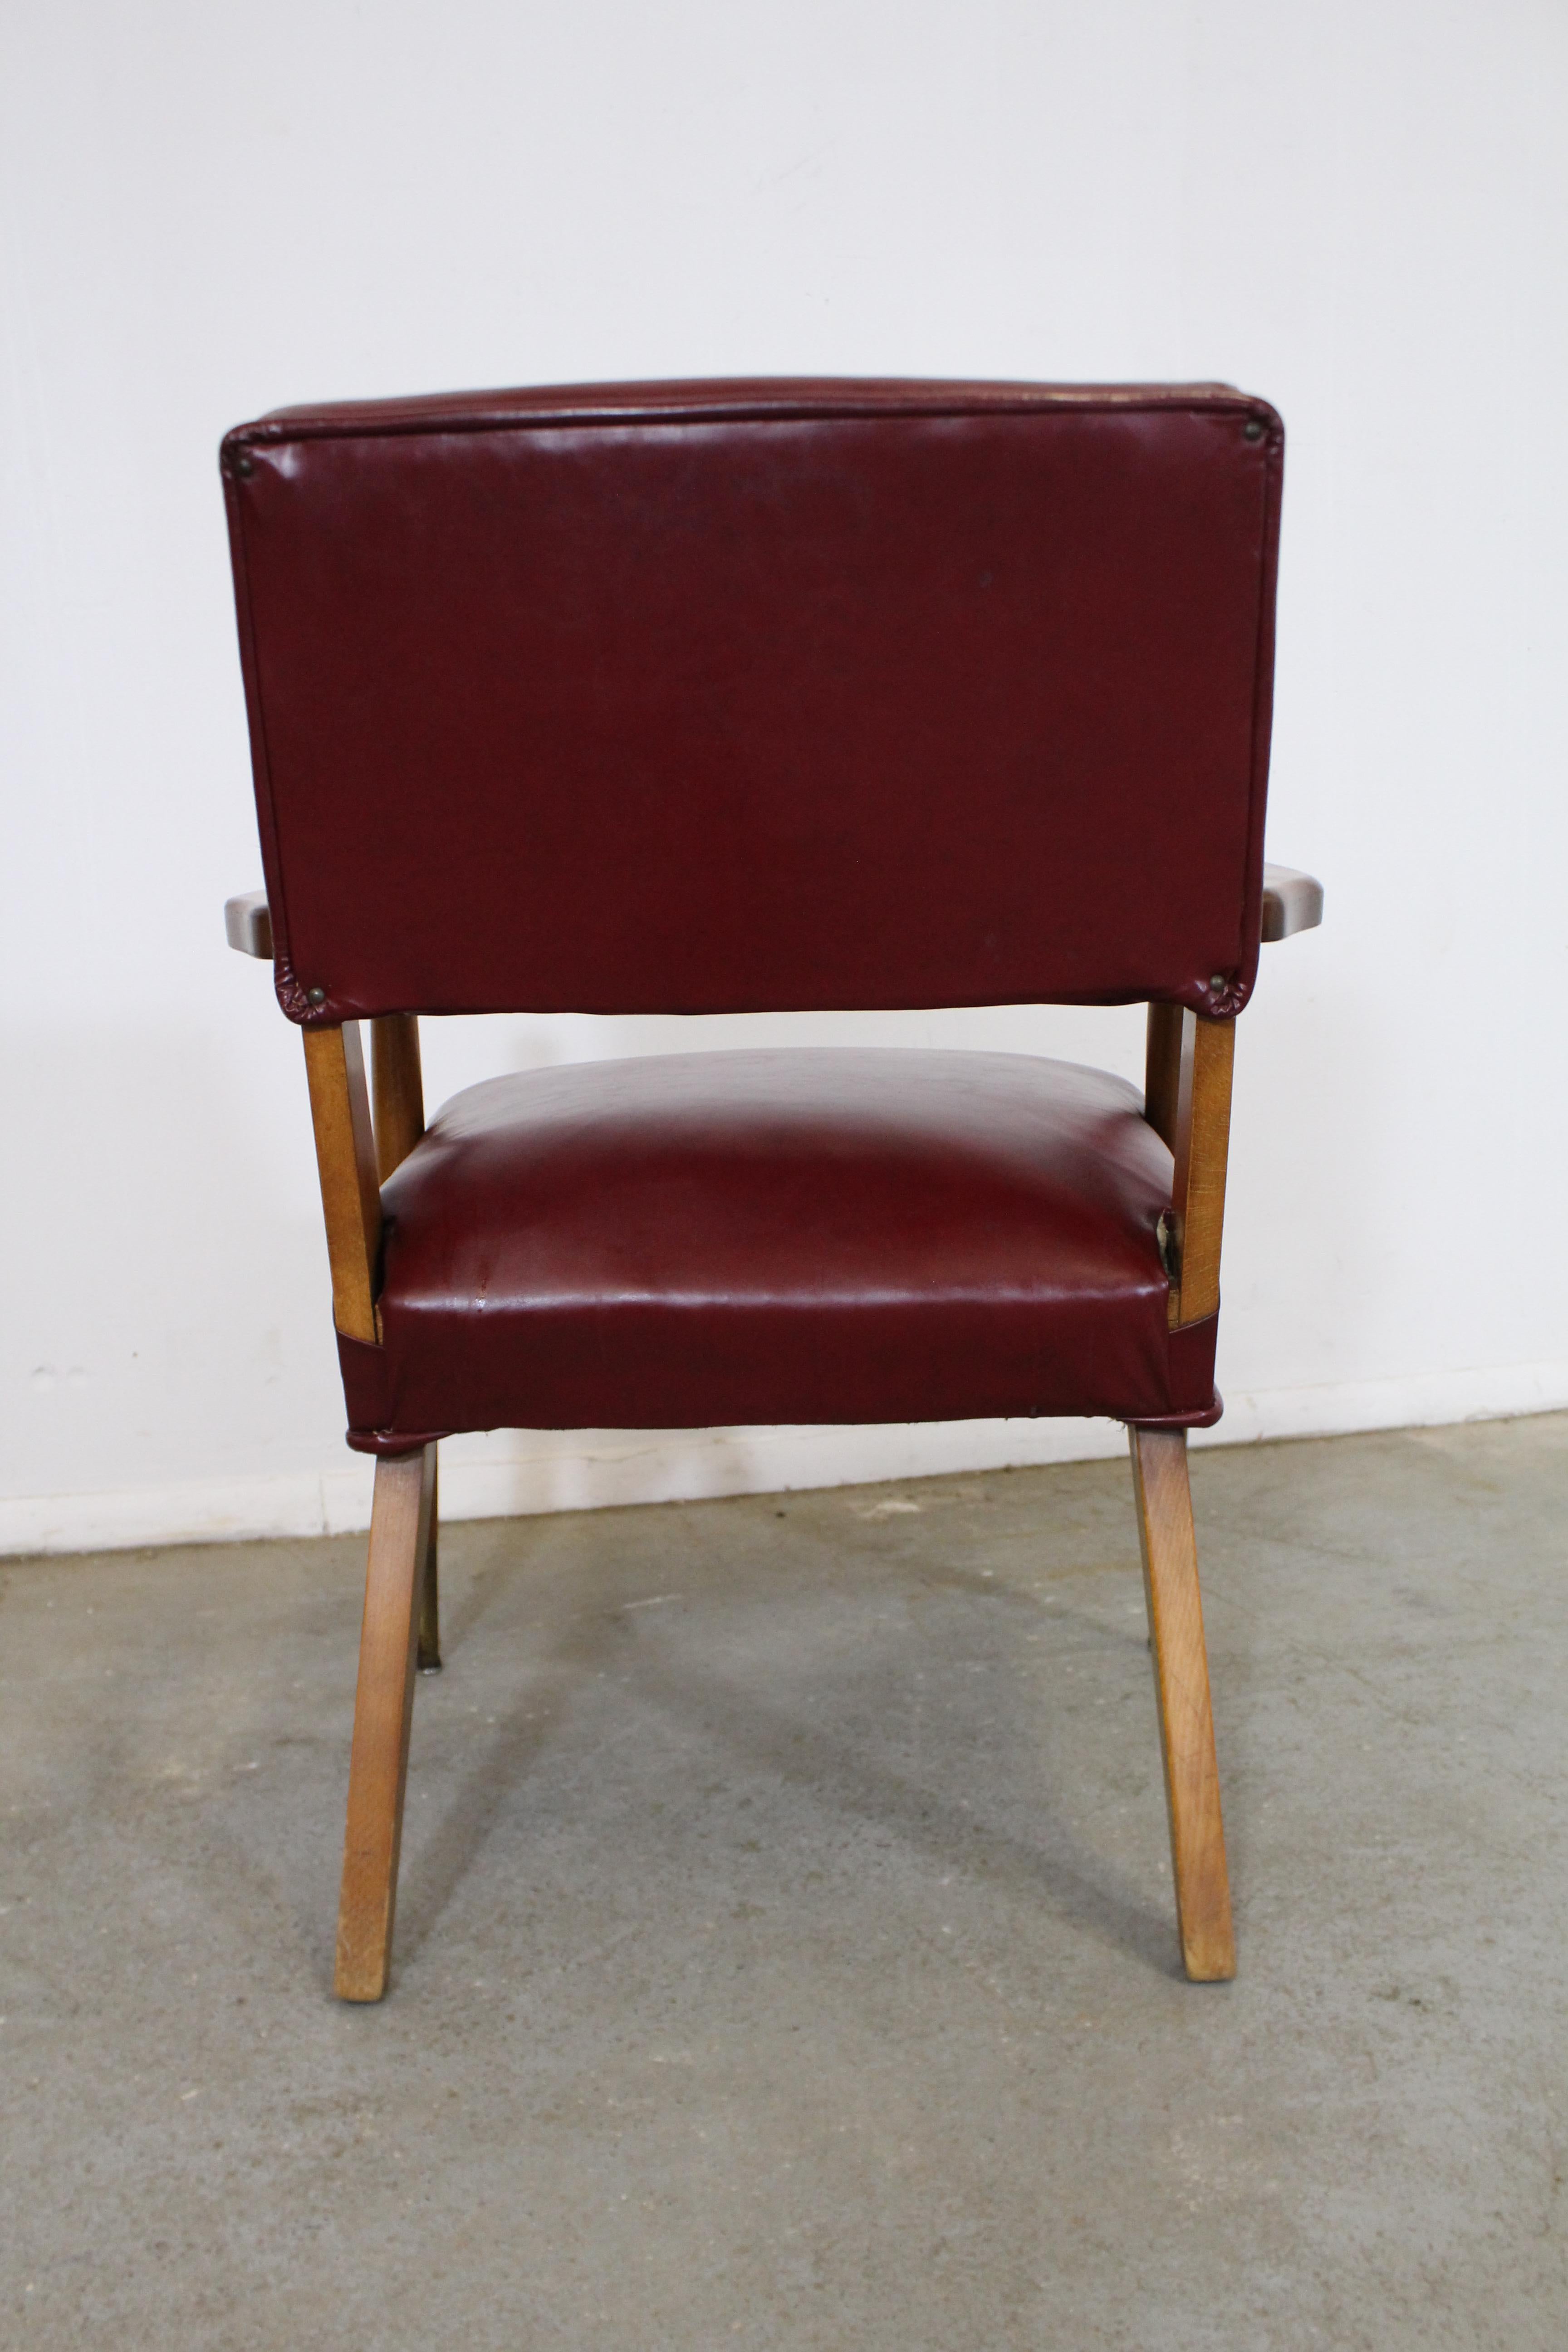 American Mid-century Modern Faux Leather Armchair